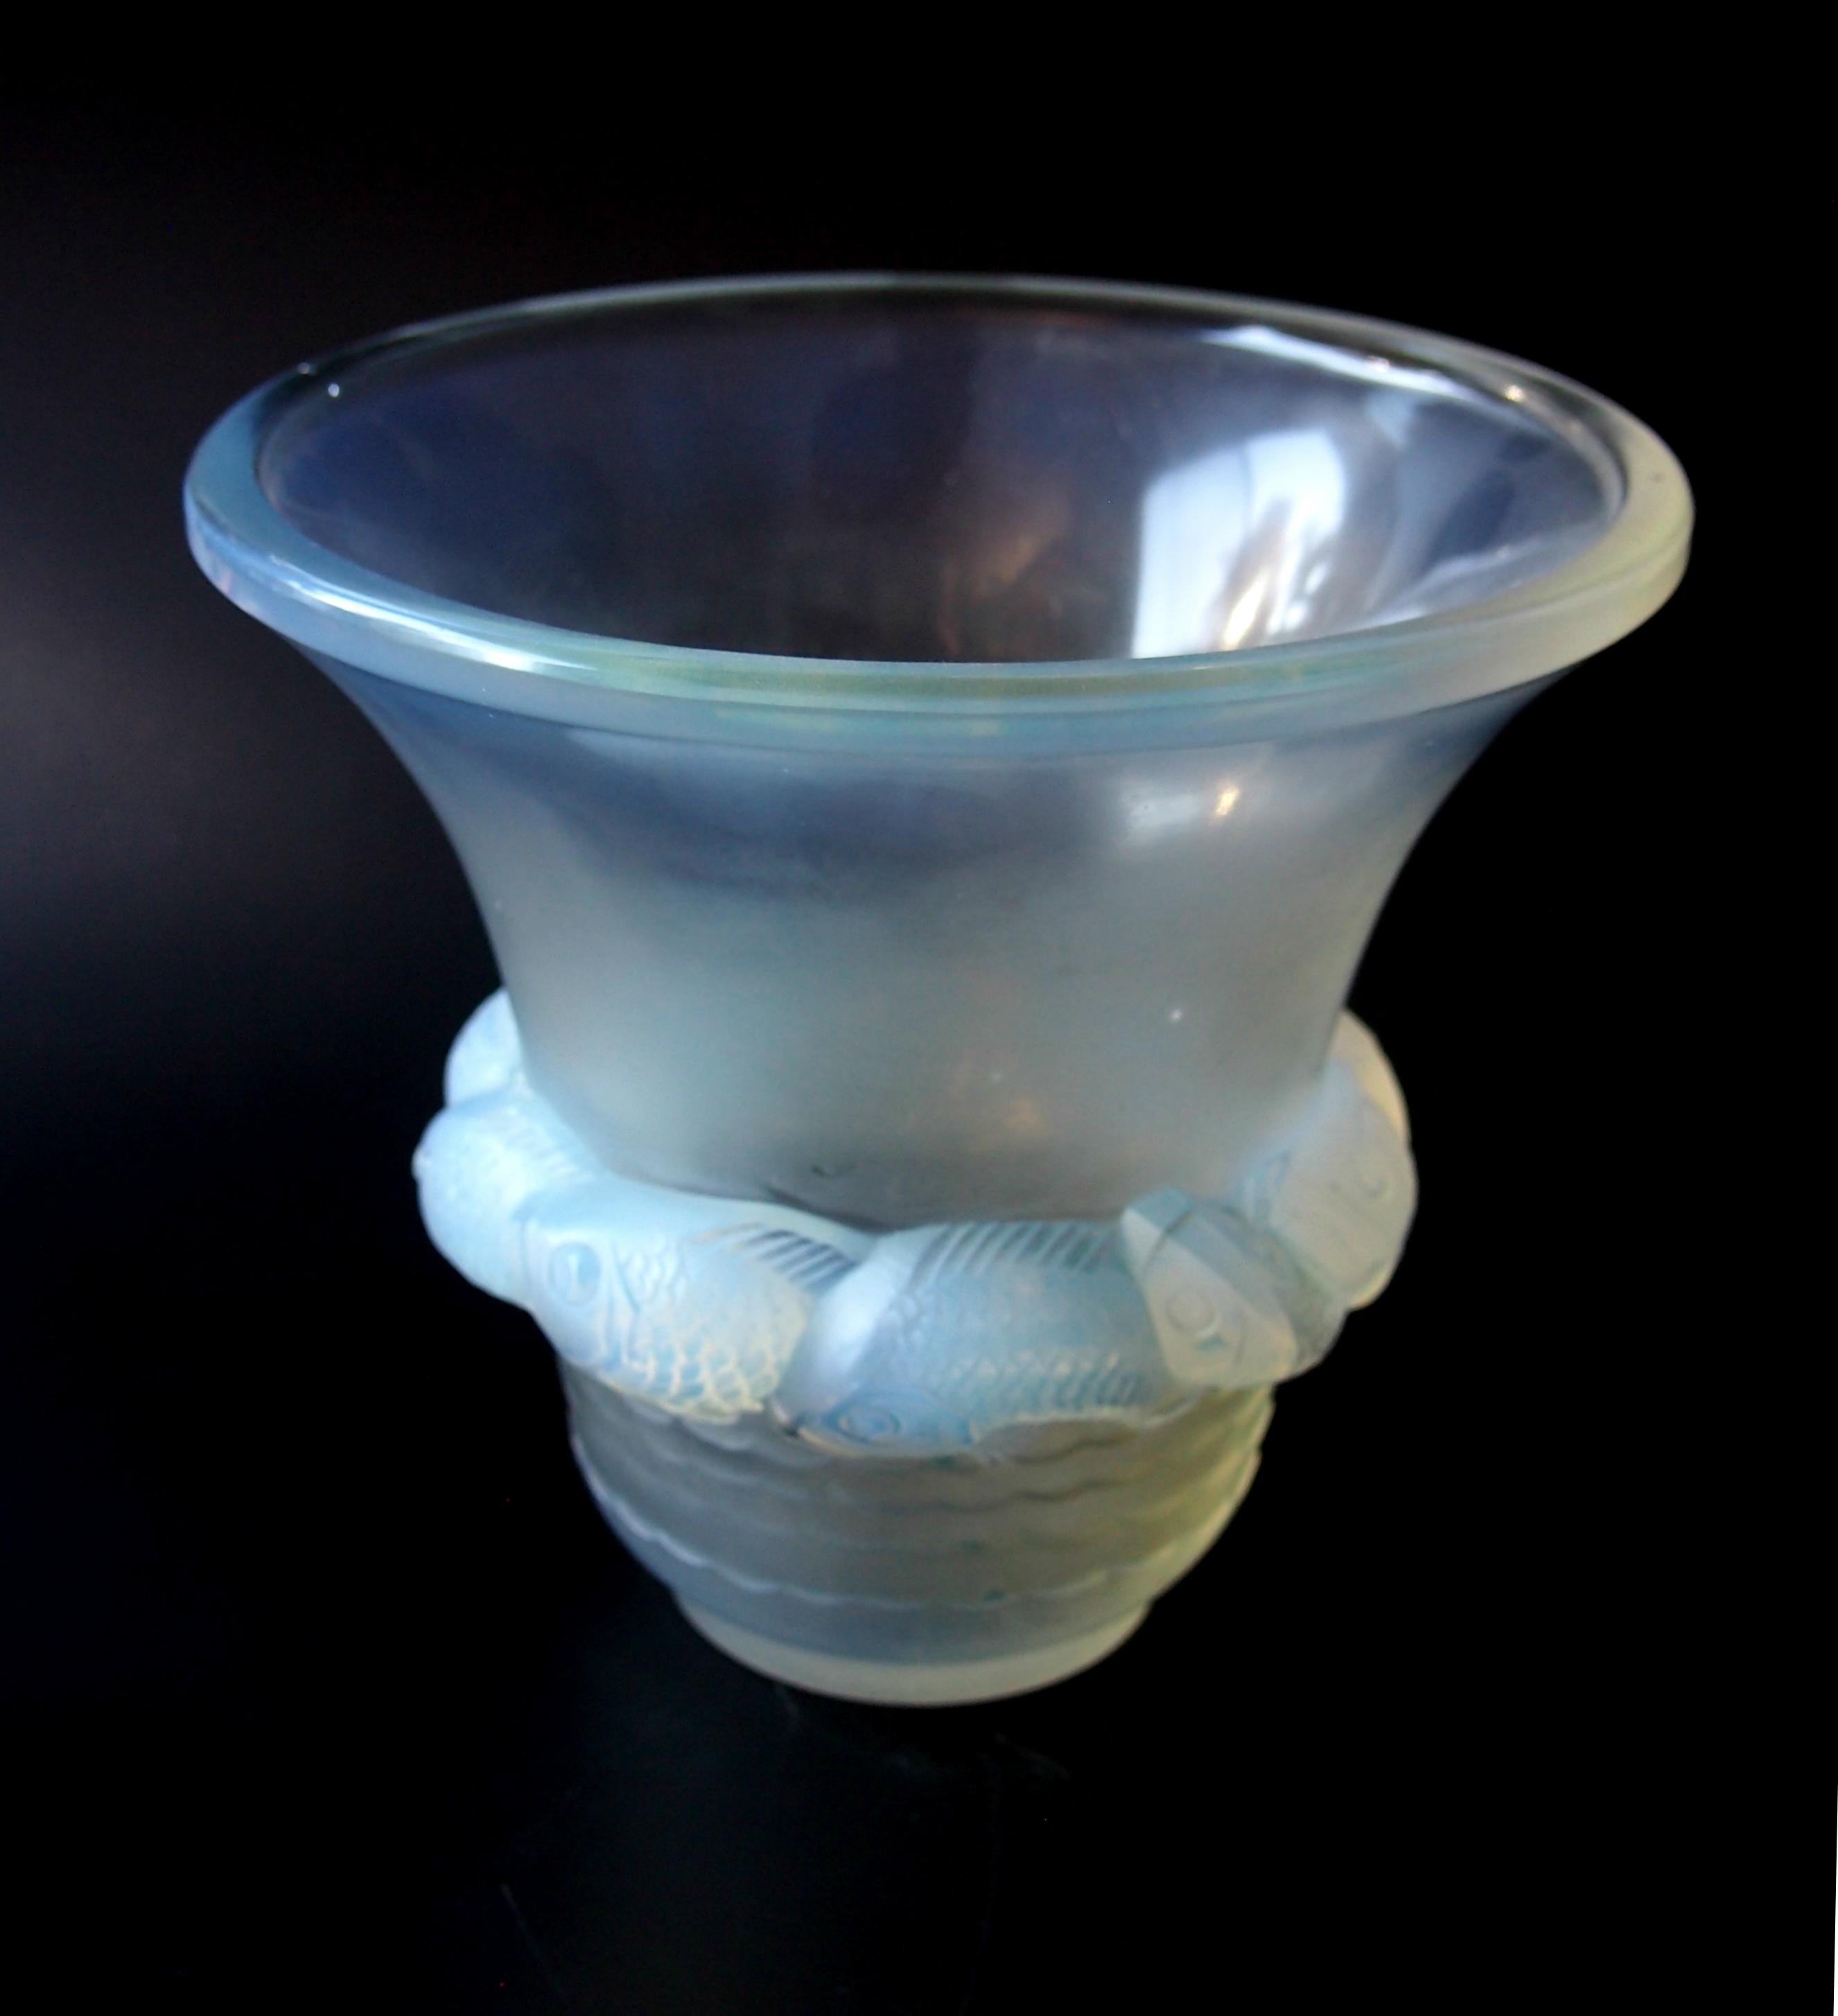 Rare strong opalescent Art Deco Rene Lalique signed 'Piriac' vase depicting stylised fish. Dating from 1930. (Ref: Marcilhac 1043). 

This is one of the finest and rarest of his opalescent Art Deco vases the opalescence is excellent with blues